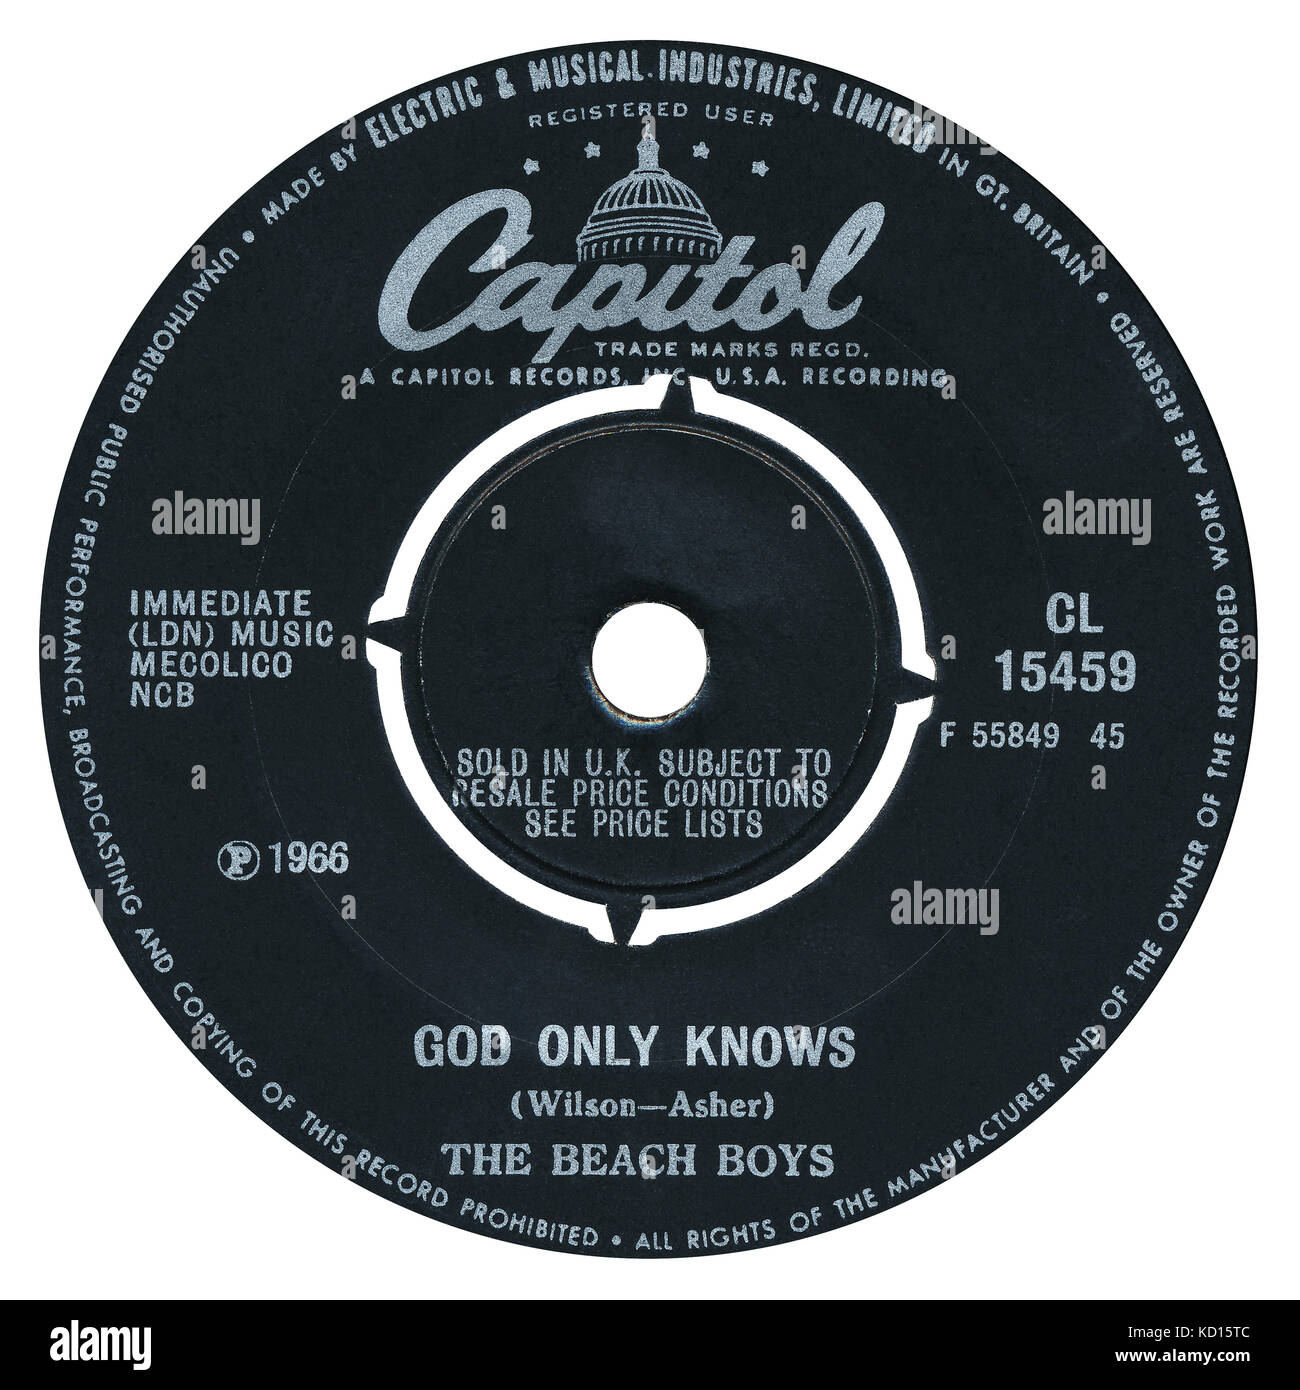 45 RPM 7' UK record label of God Only Knows by The Beach Boys on the Capitol label from 1966. Stock Photo